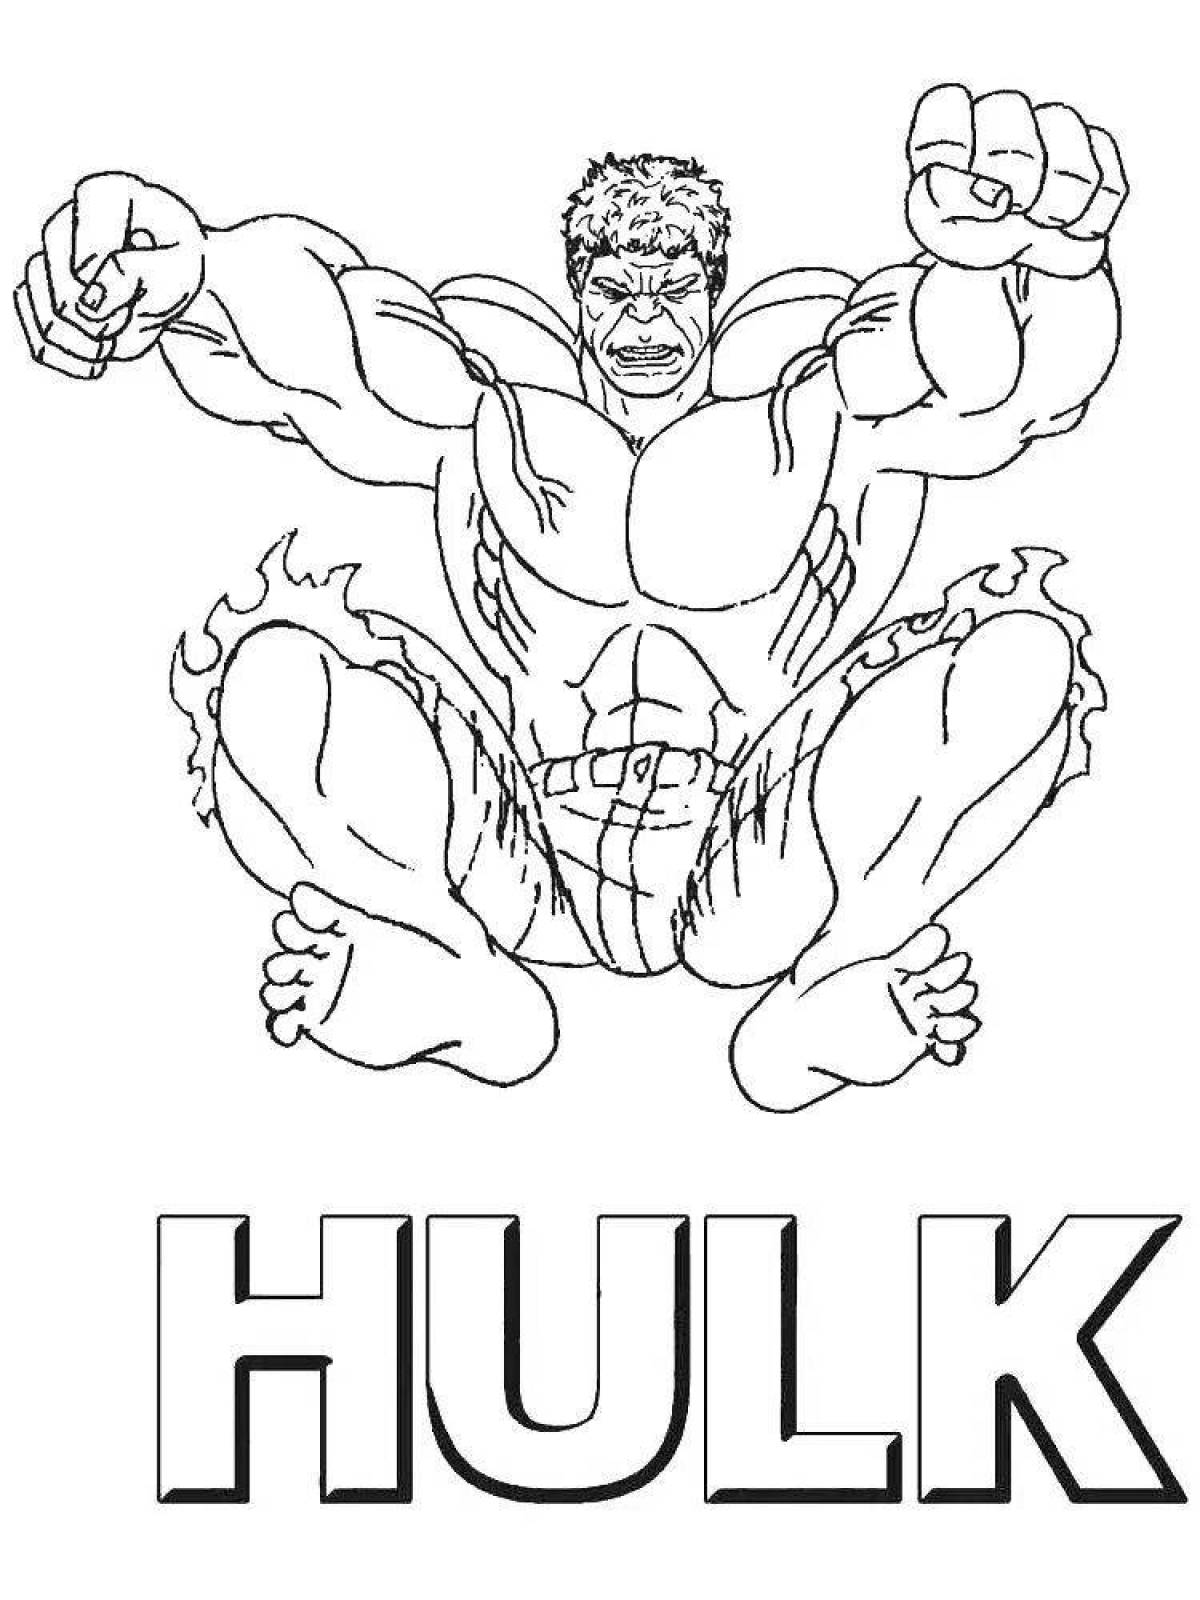 Coloring page magnanimous hulk